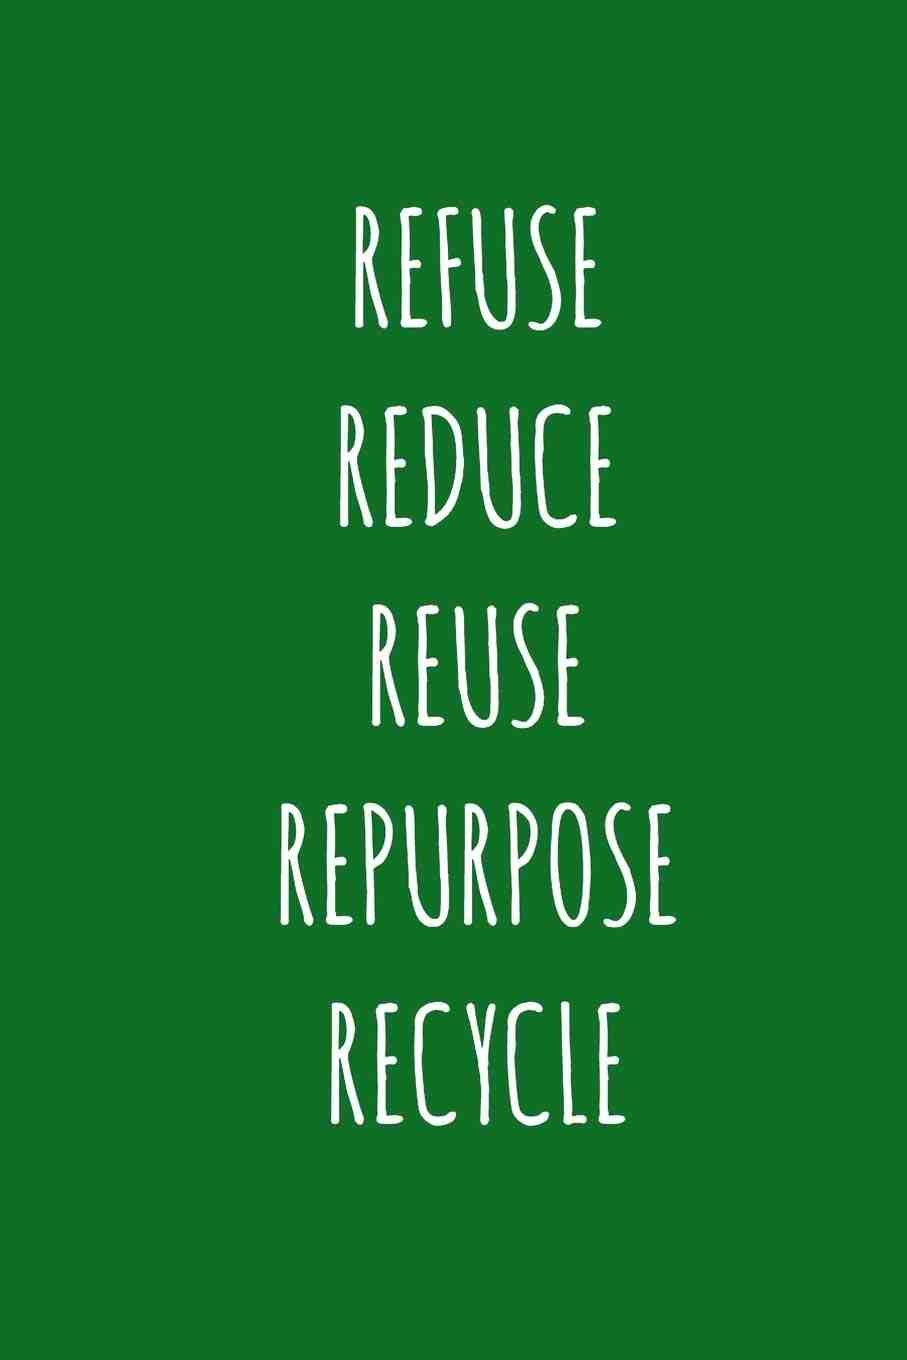 What is another word for repurpose?